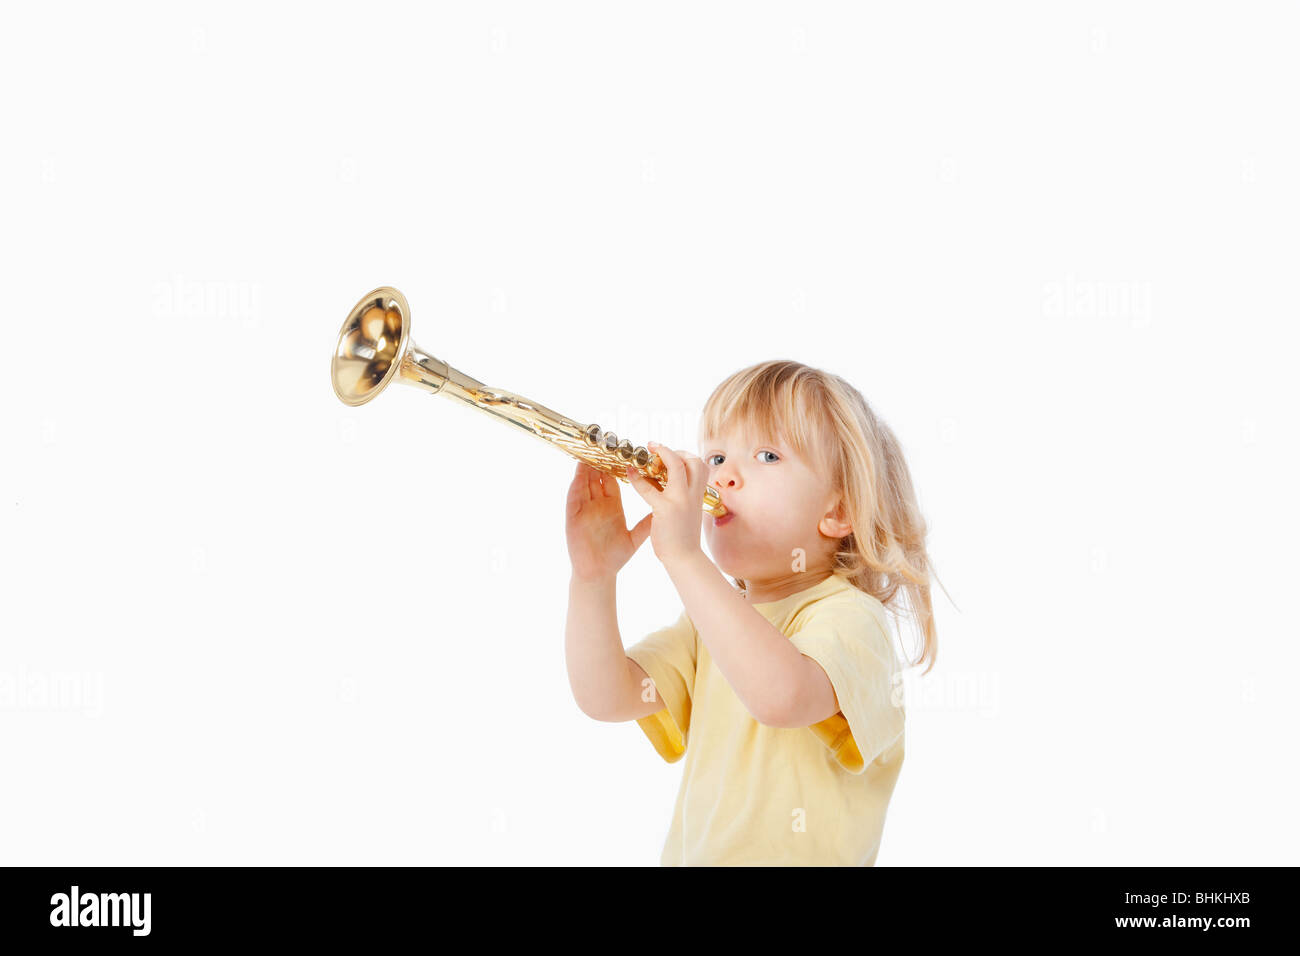 boy with long blond hair playing with toy trumpet Stock Photo